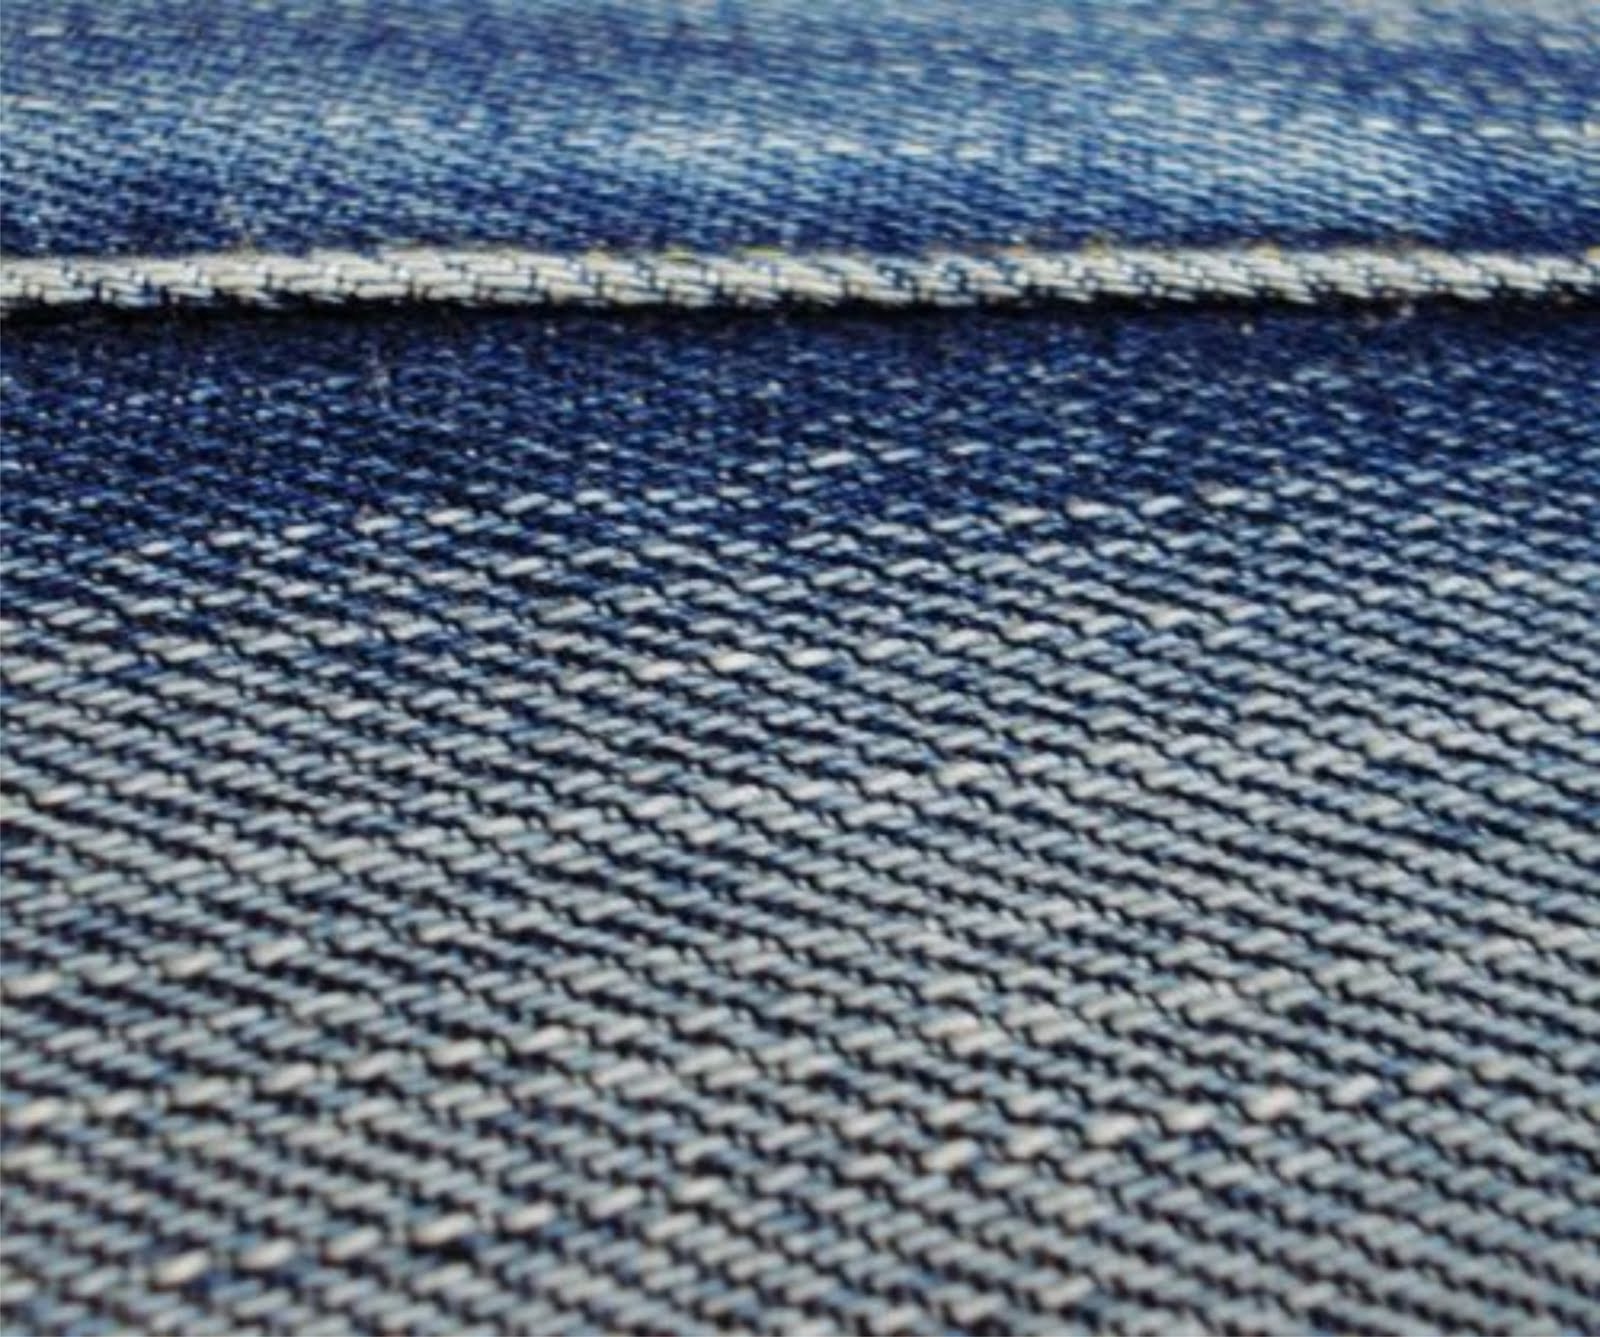 Global Denim Fabric Trade Continues Growth Trend 